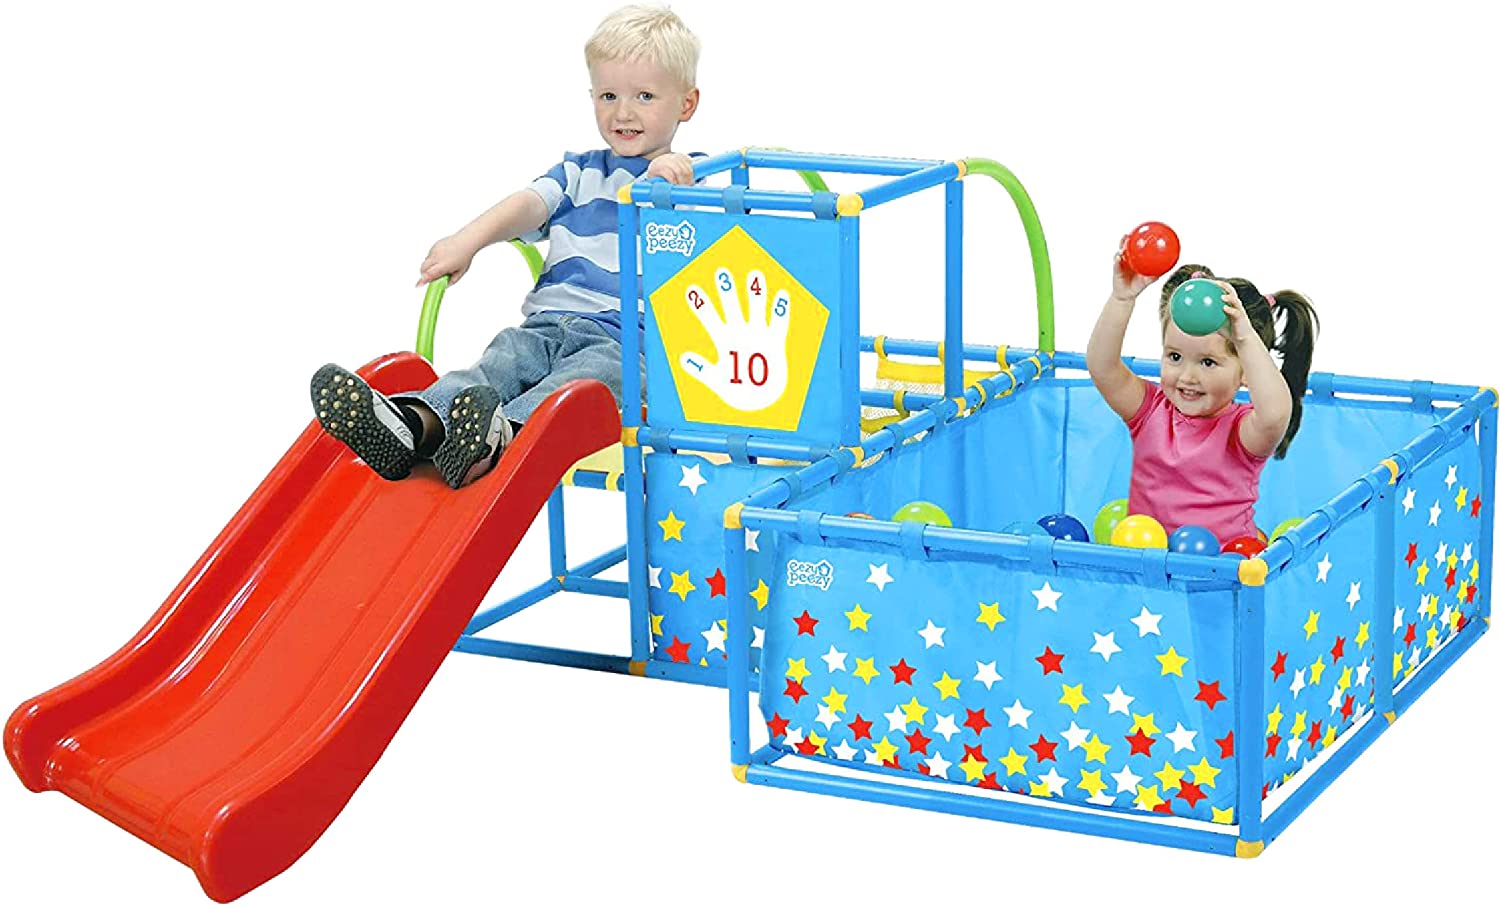 playhouse with slide